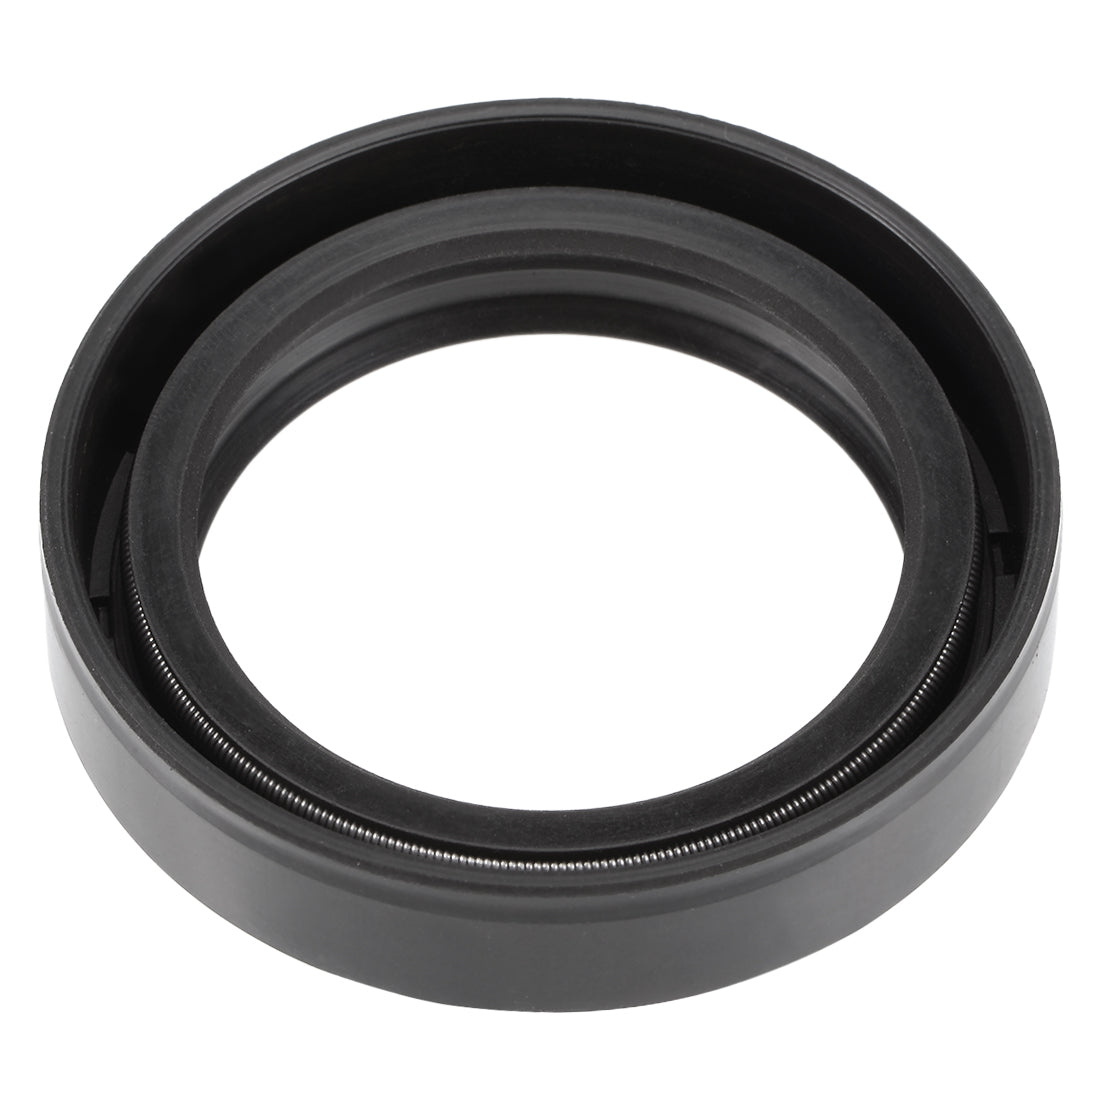 Uxcell Uxcell Oil Seal, TC 25mm x 40mm x 10mm, Nitrile Rubber Cover Double Lip